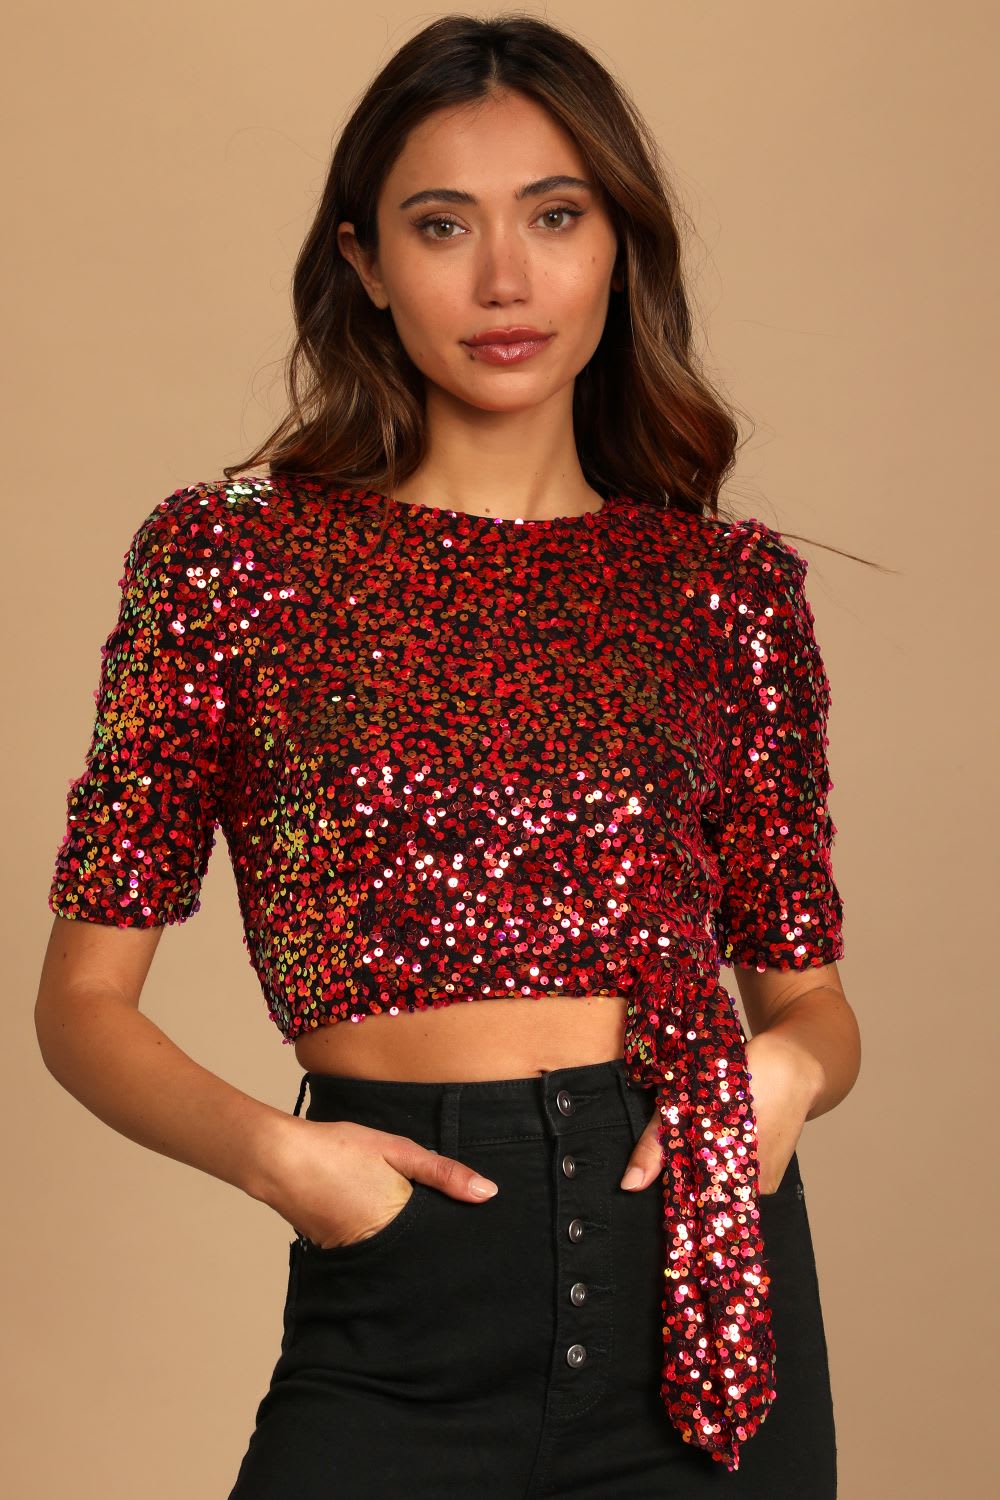 Dressy Holiday Tops: Gorgeous Party Tops For 2022 - Lulus.com Fashion Blog